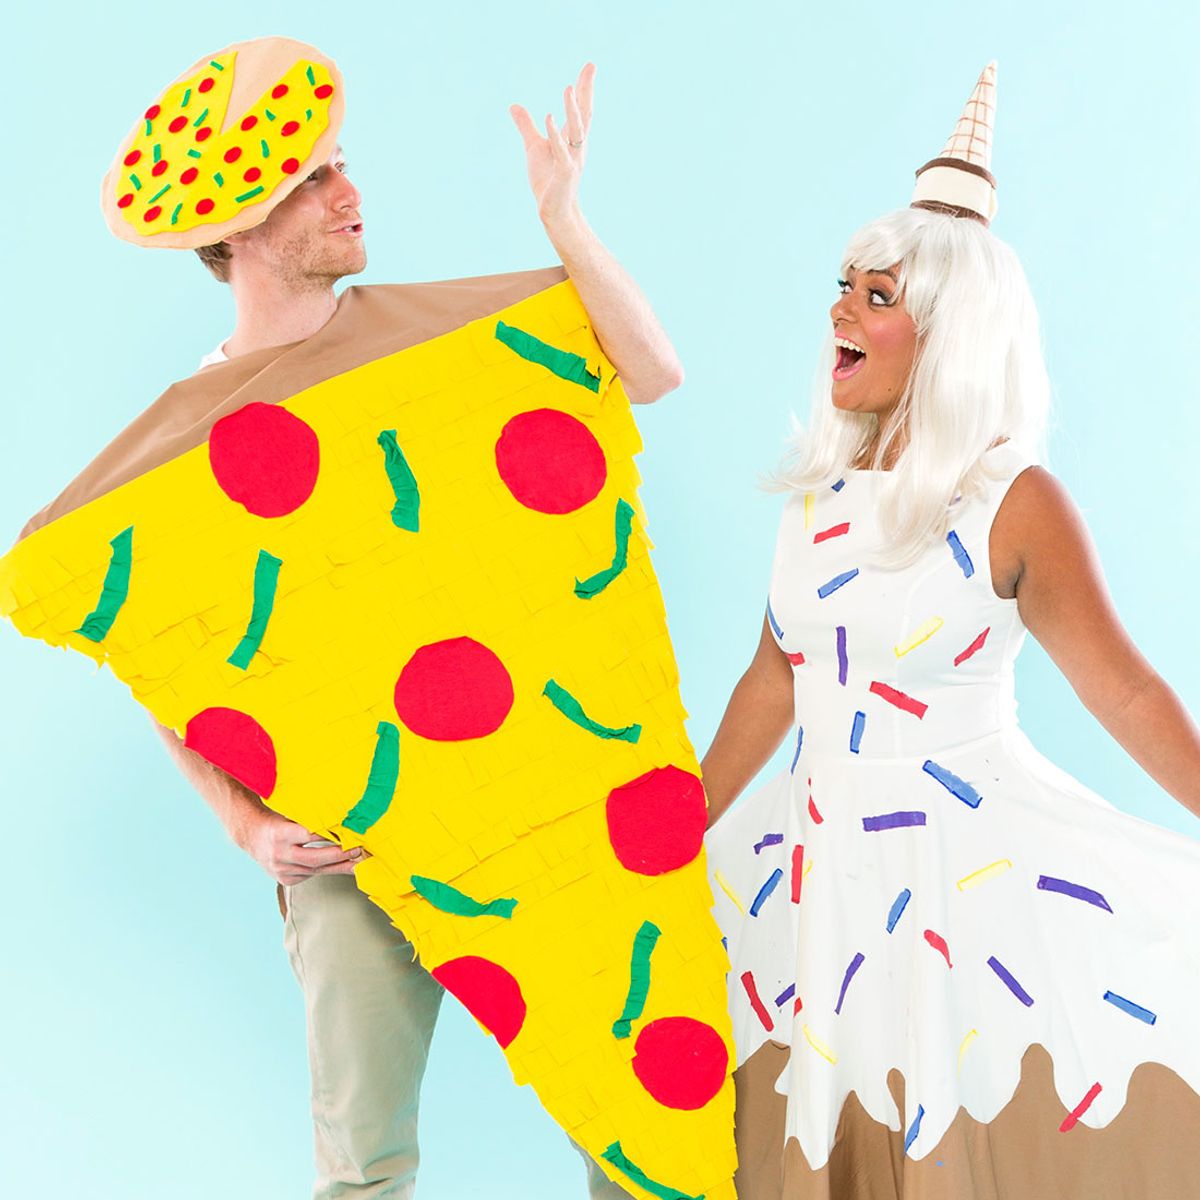 50+ Uplifting Halloween Costumes to Make You Feel Good This Weird ...